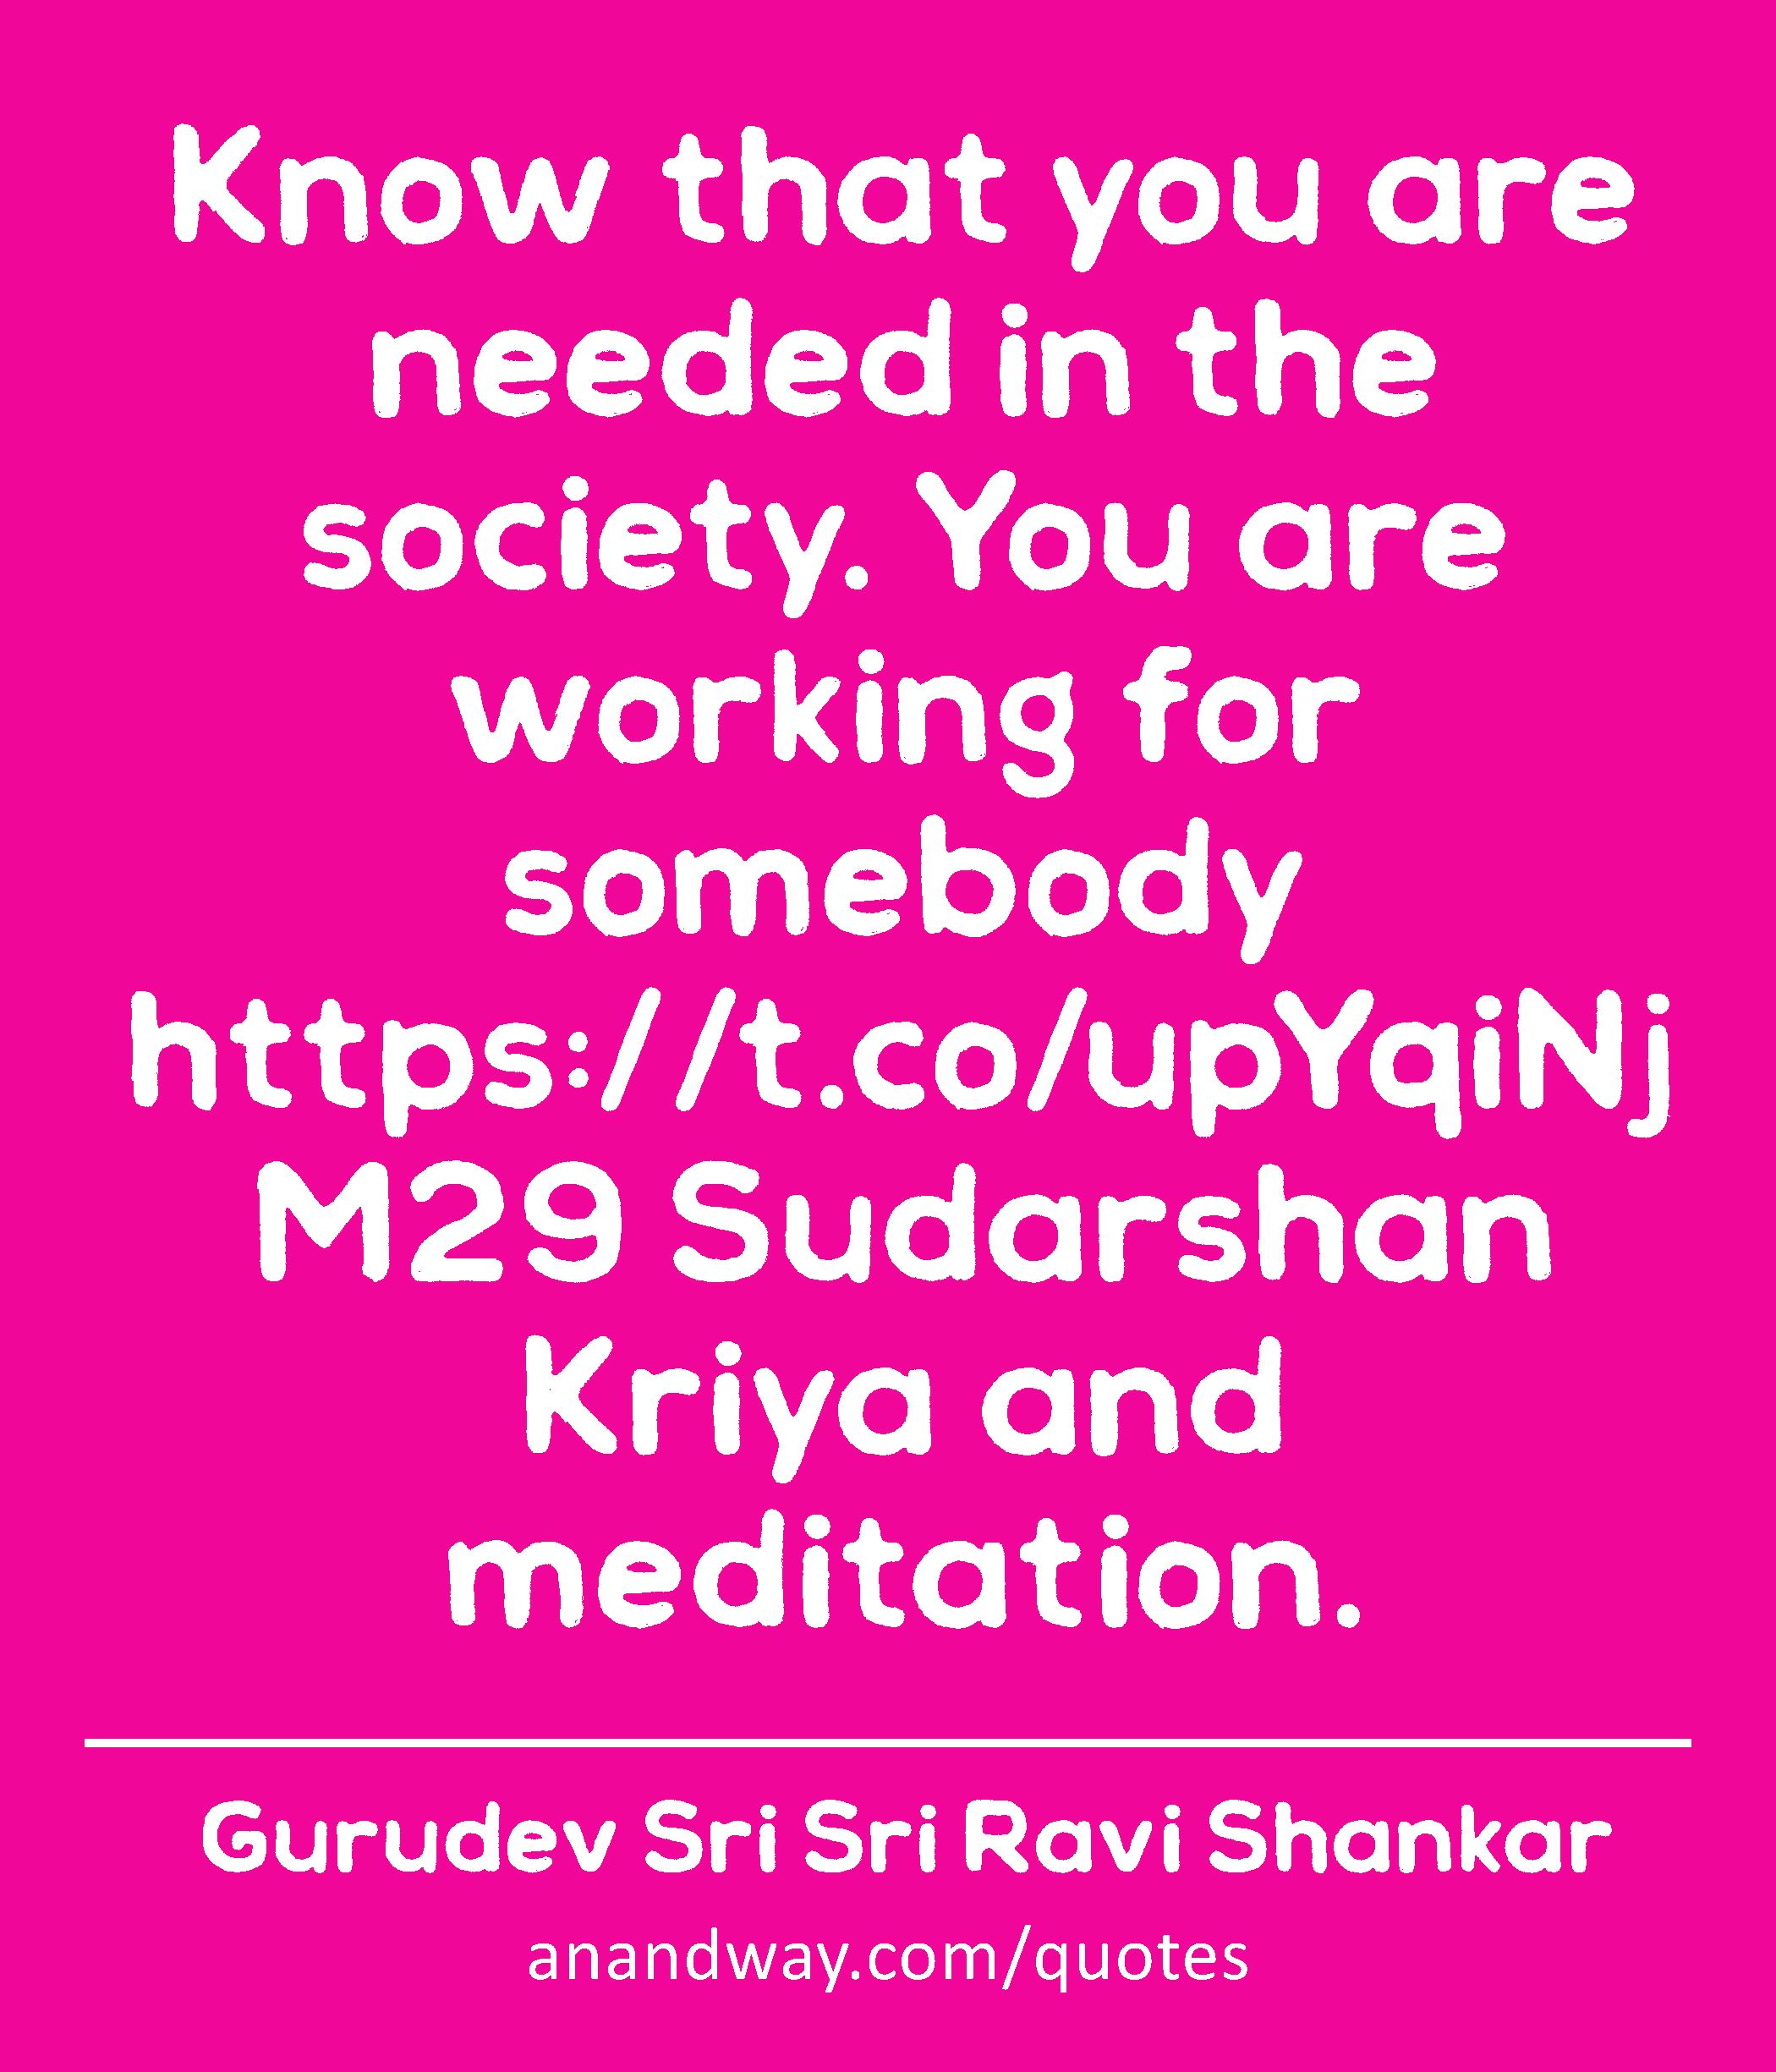 Know that you are needed in the society. You are working for somebody https://t.co/upYqiNjM29
 -Gurudev Sri Sri Ravi Shankar